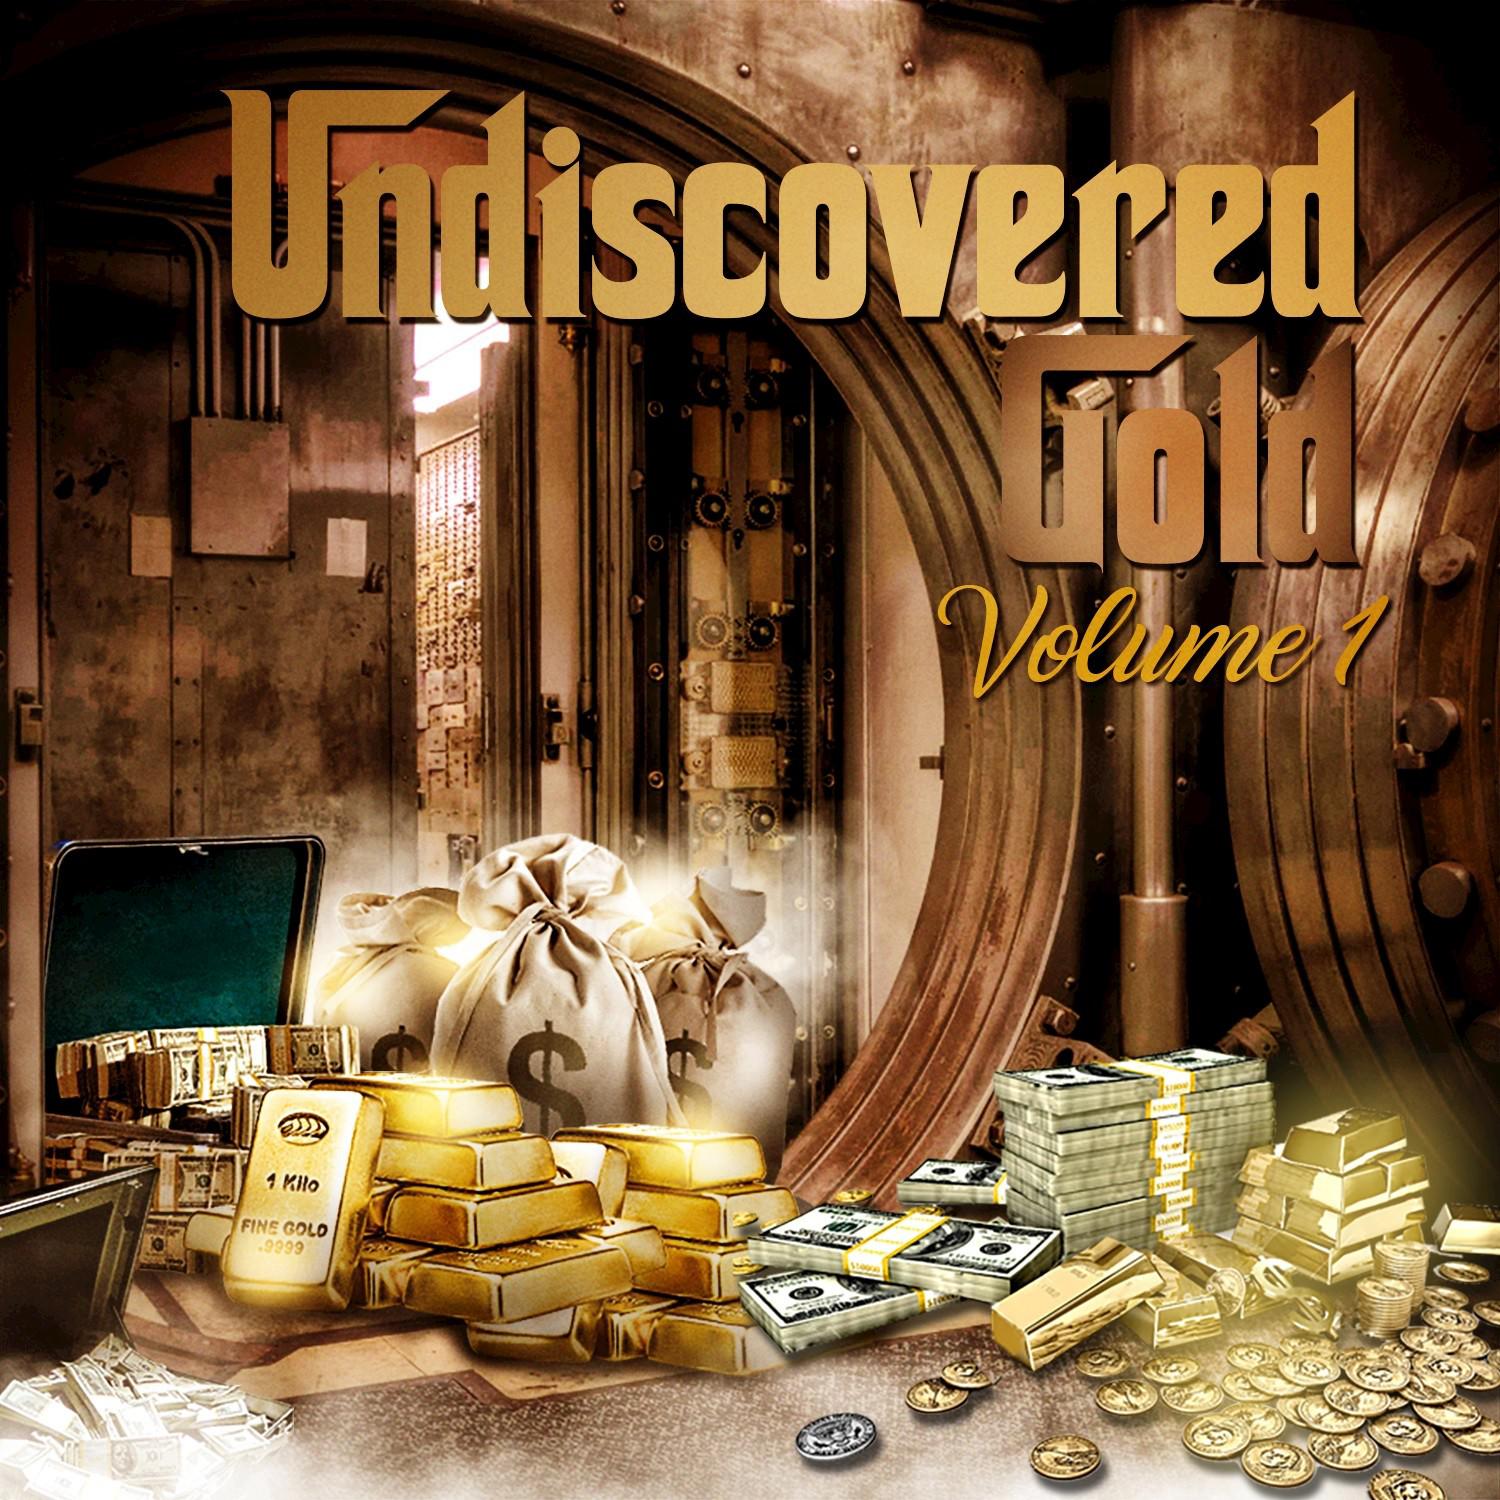 Undiscovered Gold, Vol. 1